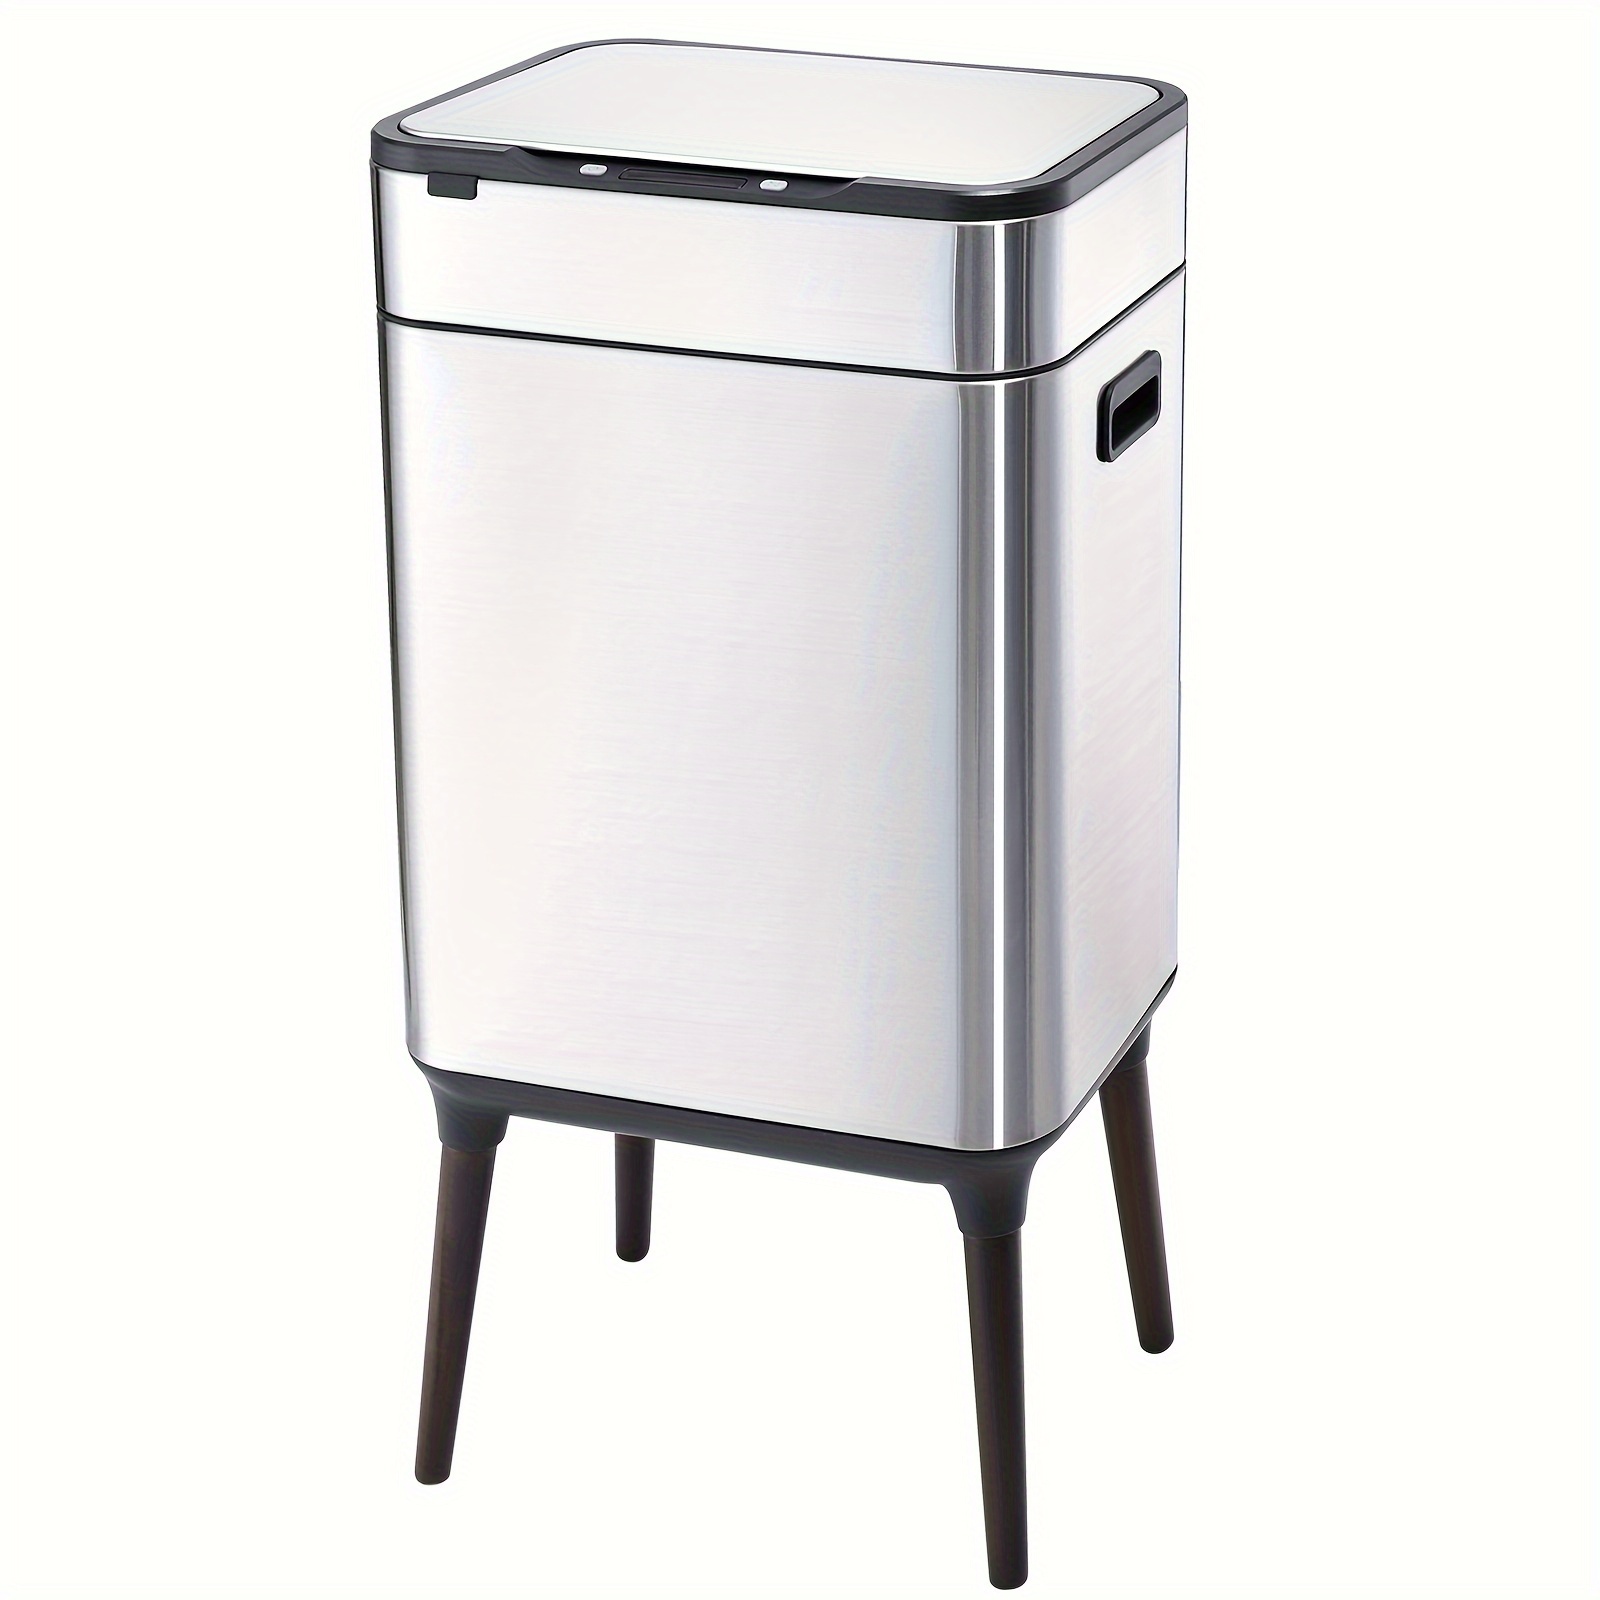 

Elpheco Stainless Steel Kitchen Trash Can 12 Gallon Brushed Stainless Steel Motion Sensor Trash Can Without Inner Bucket, Large Capacity Motion Kitchen Trash Can With Wooden Legs